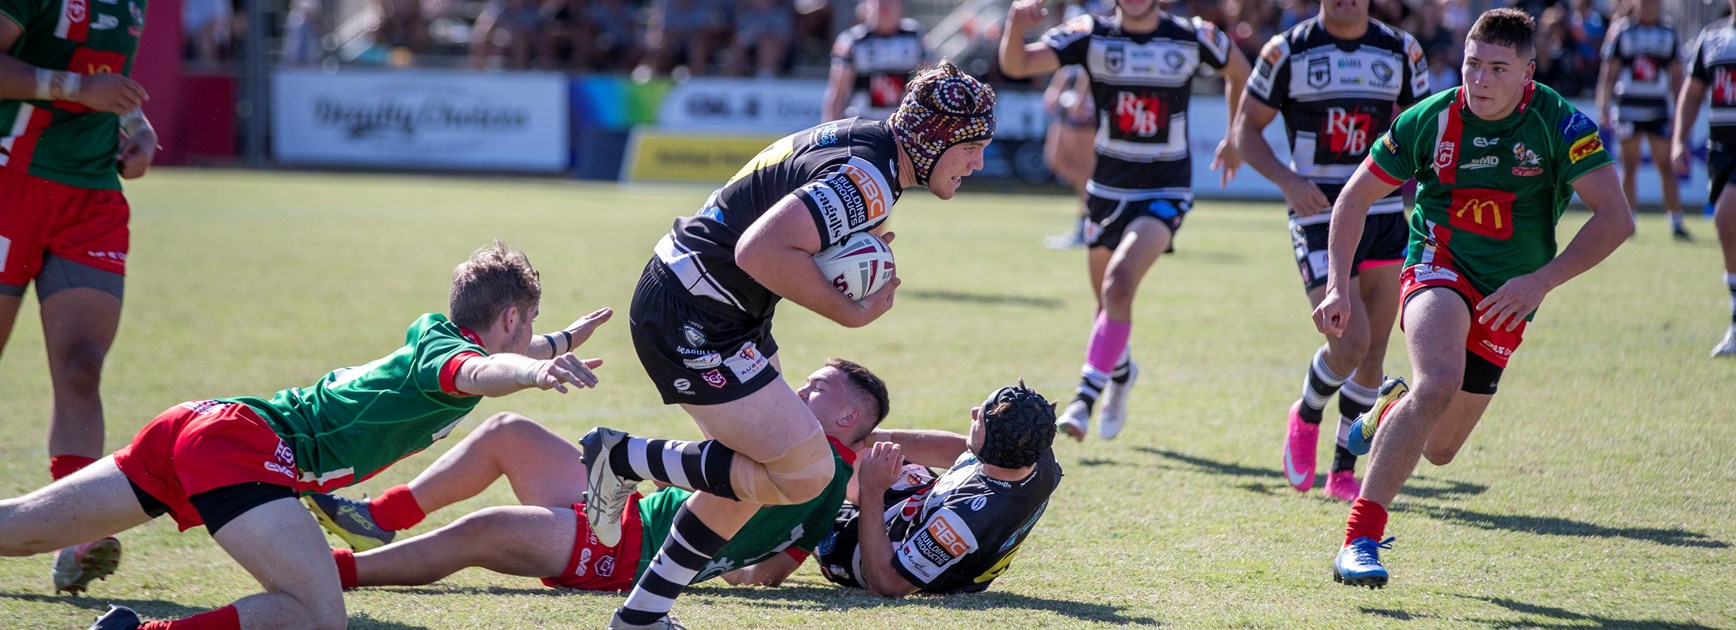 Tweed show class against Wynnum Manly to advance to decider